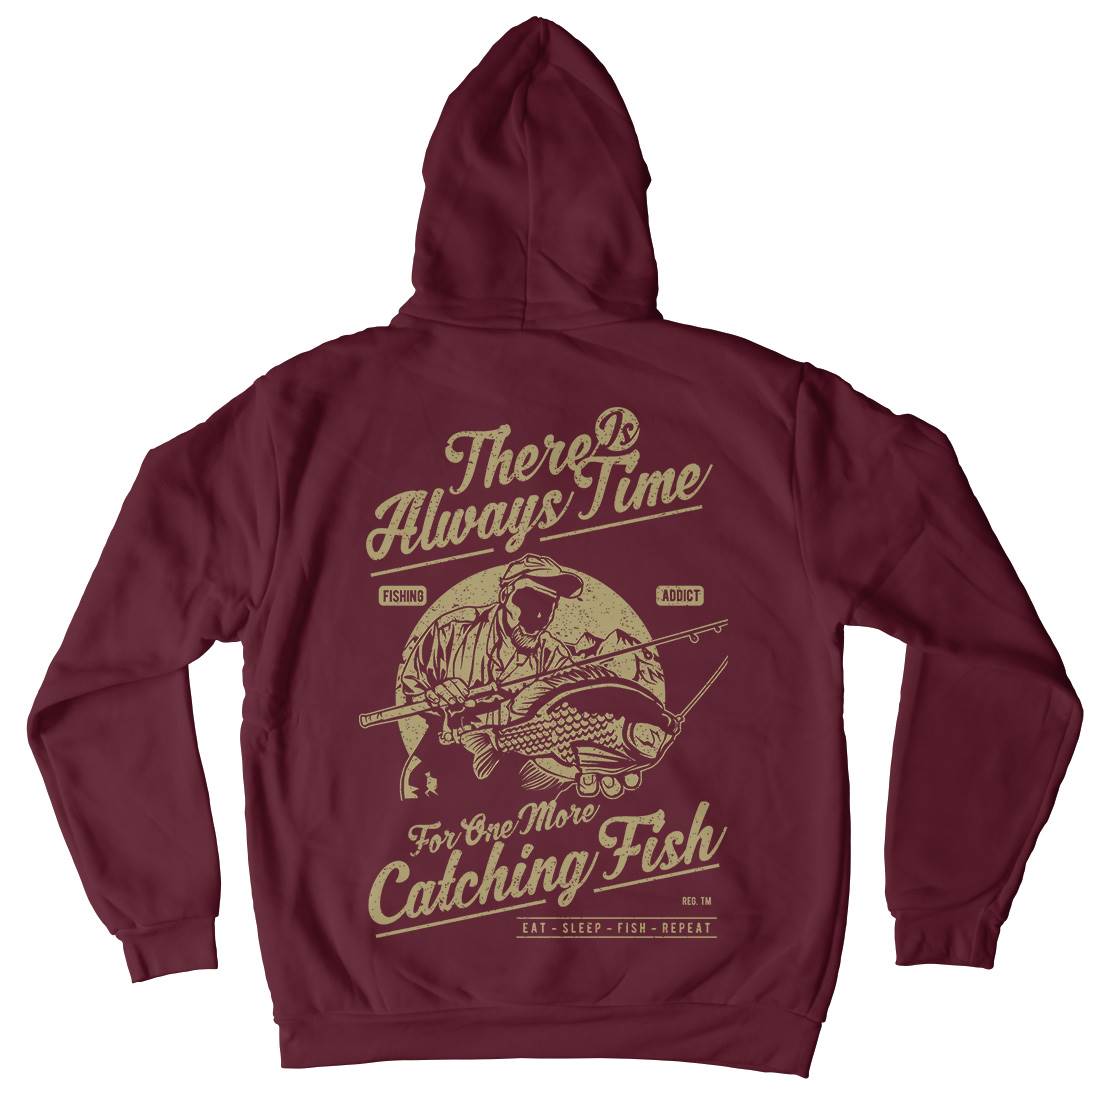 One More Catching Mens Hoodie With Pocket Fishing A731